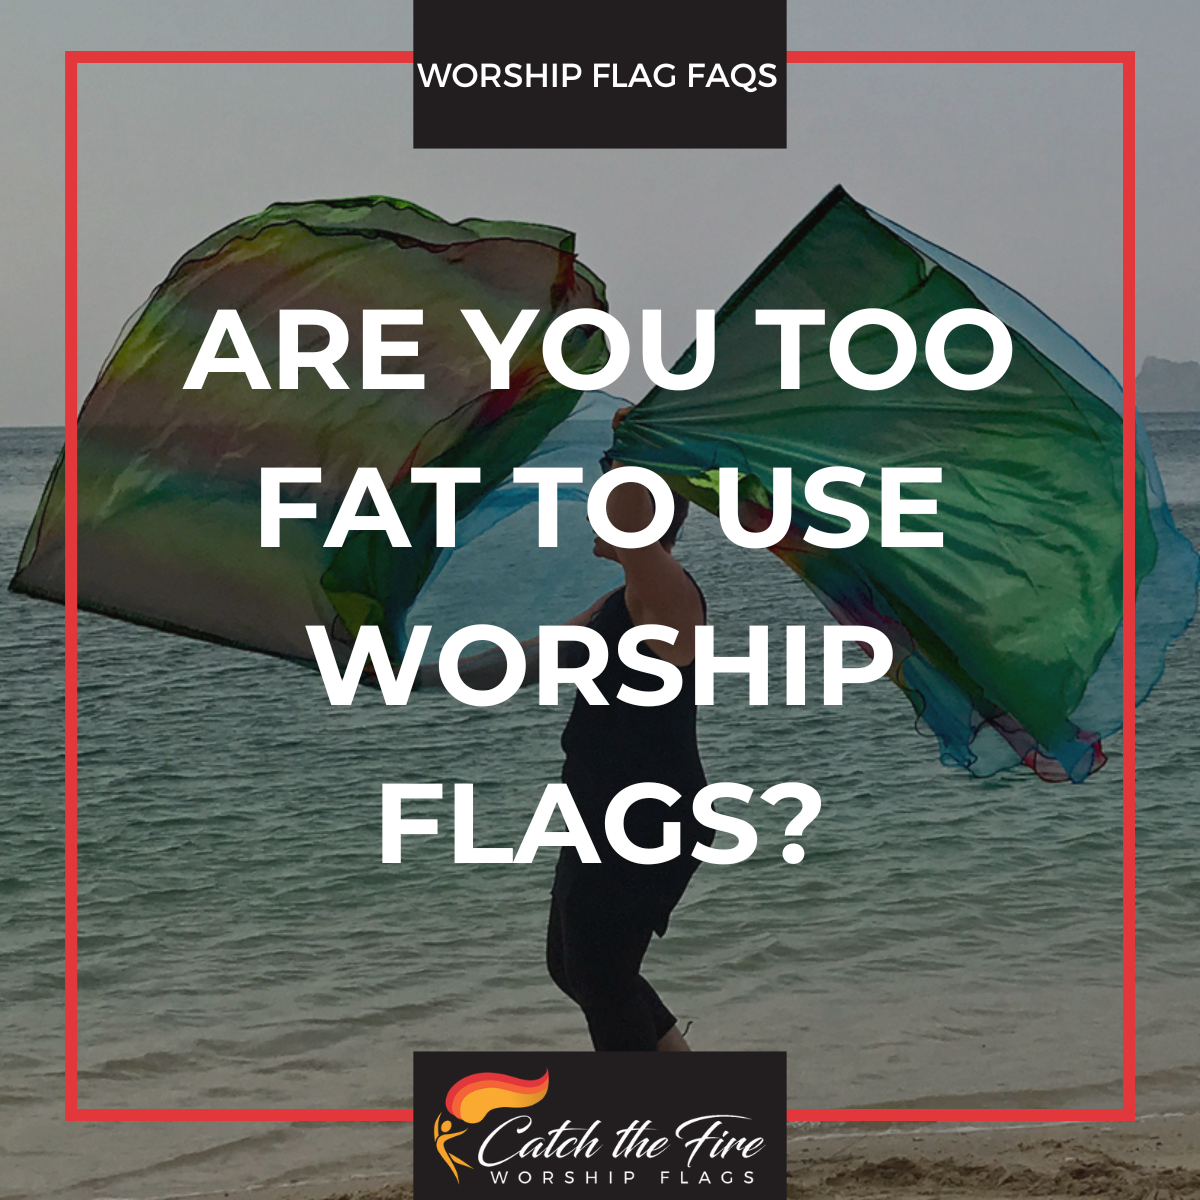 Are You Too Fat to Use Worship Flags?